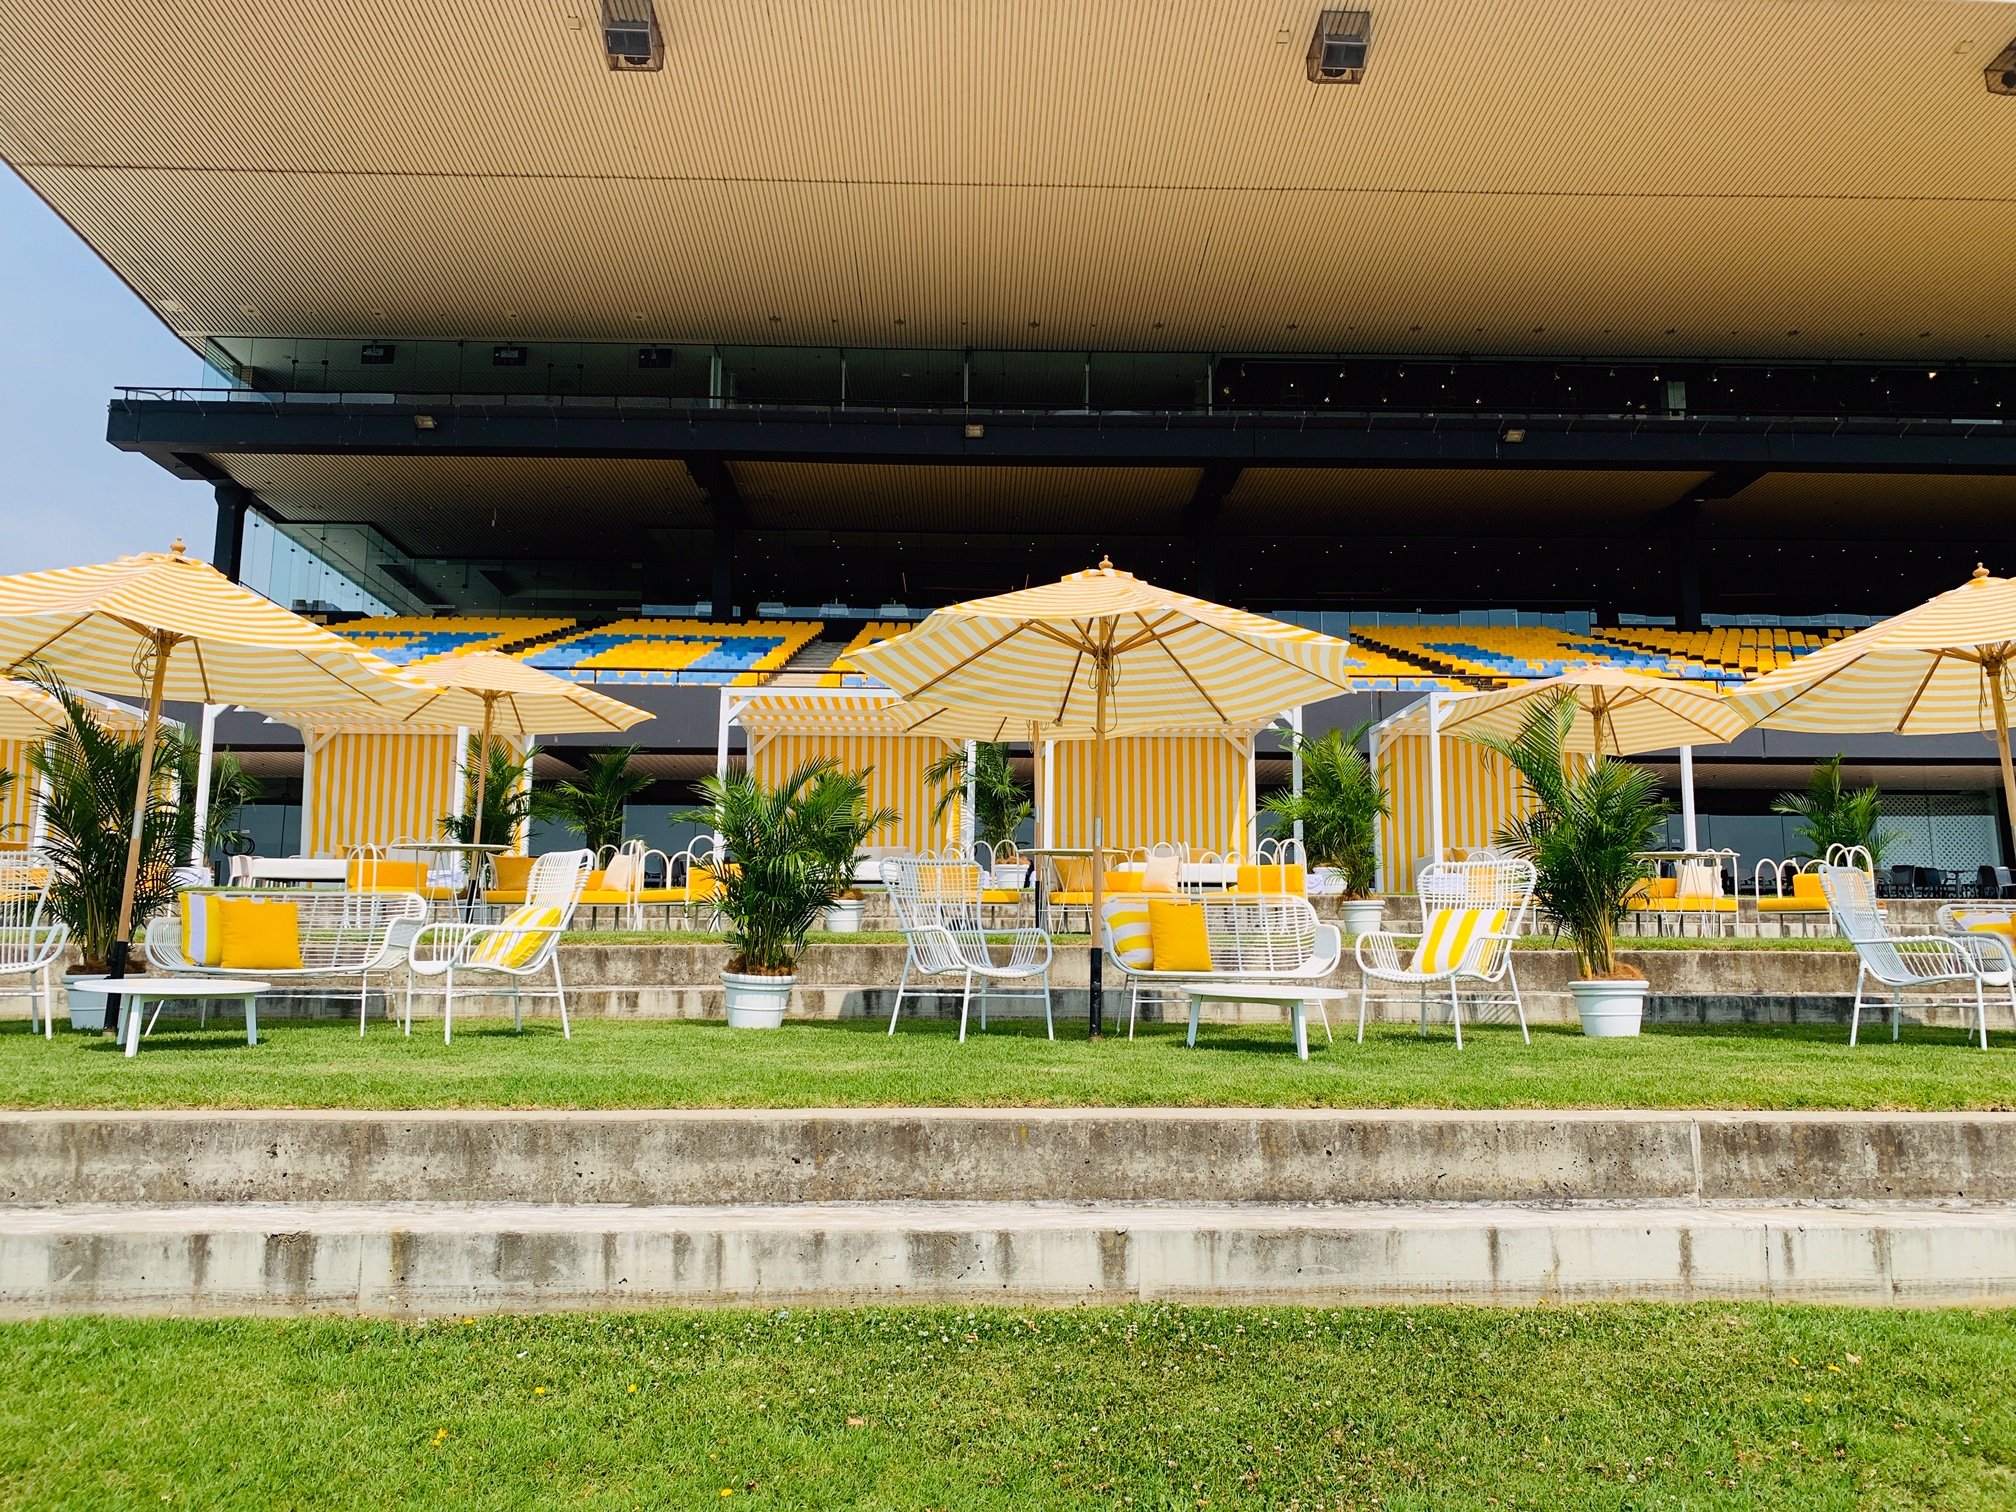 sun control-Docril Designs-Melbourne Cup activation by Outdoor Blinds & Awnings-05-1